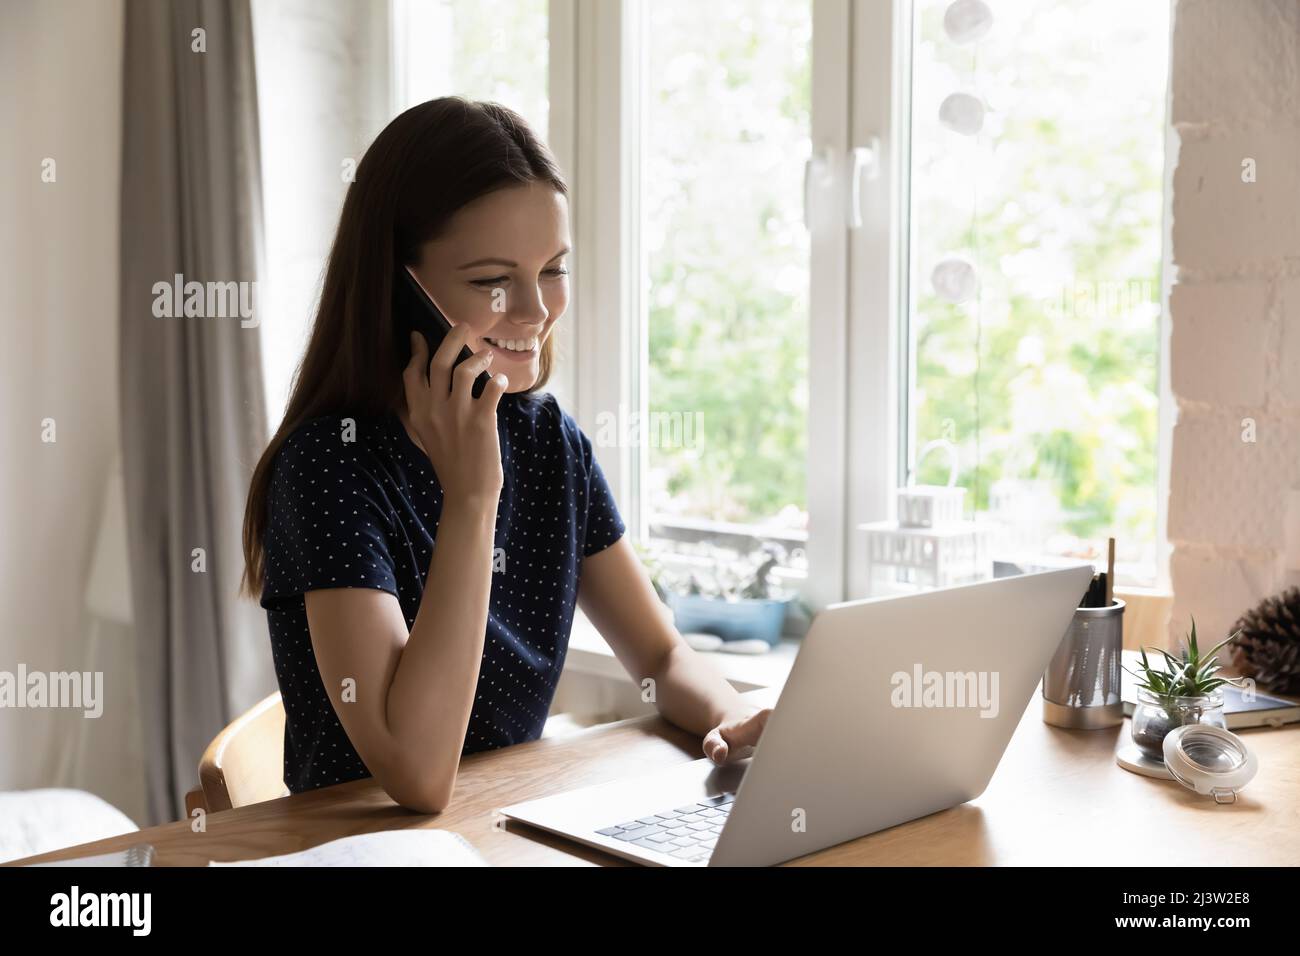 Woman sit at table with laptop enjoy conversation on cellphone Stock Photo